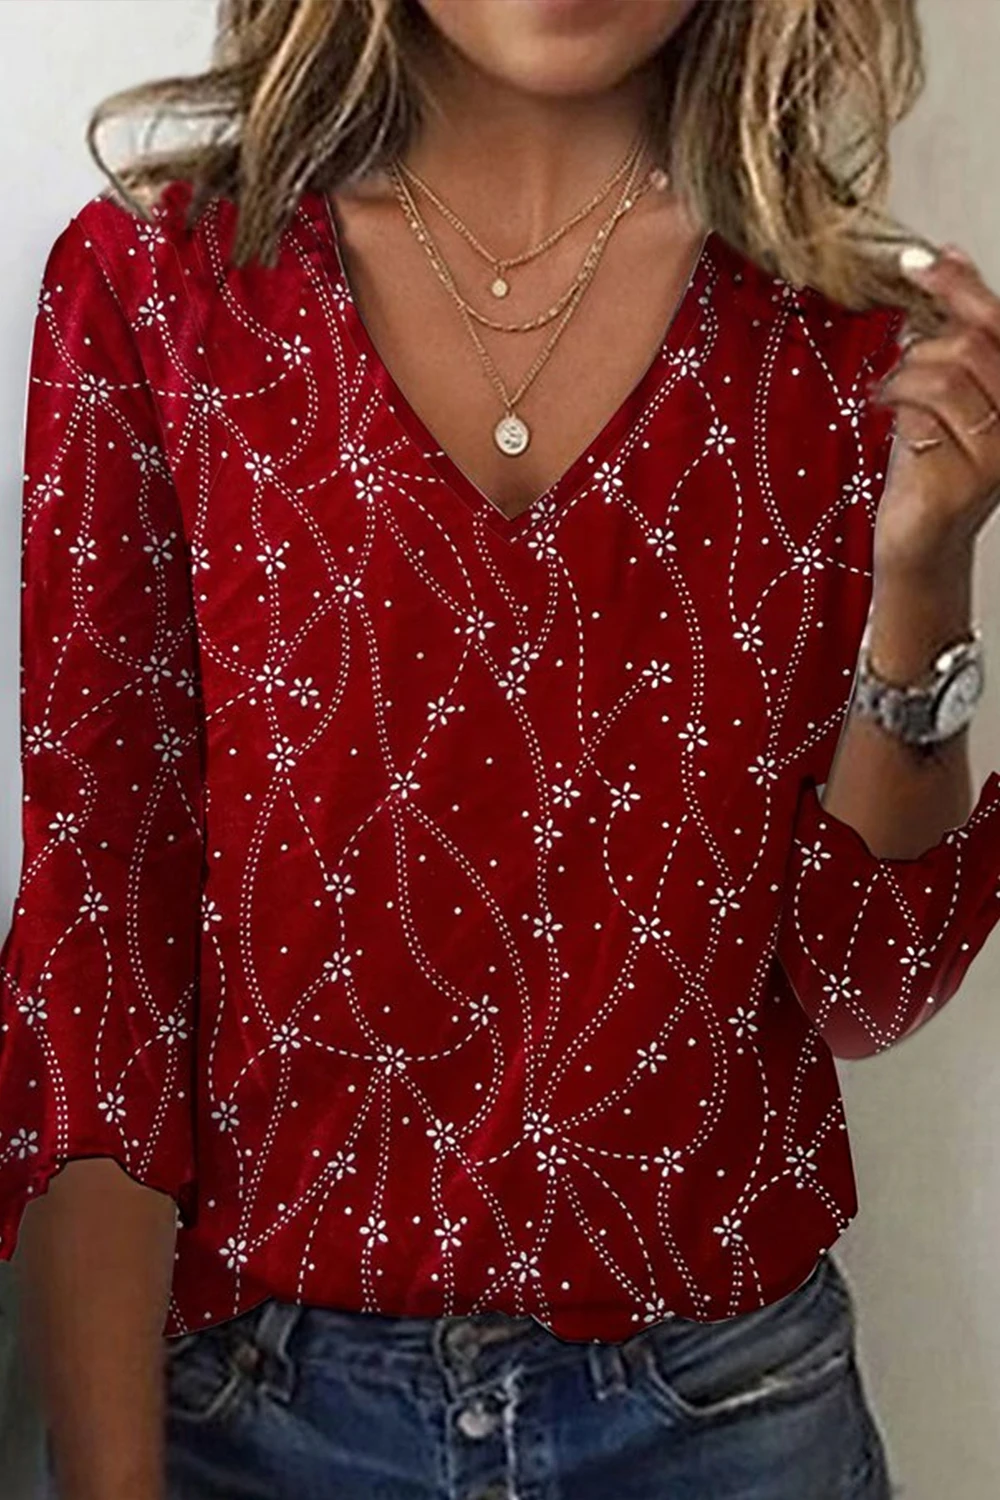 Flycurvy Plus Size Christmas Red Disty Floral Print 3/4 Flare Sleeve Blouse blouses christmas santa claus sequined blouse in white size l m s xl